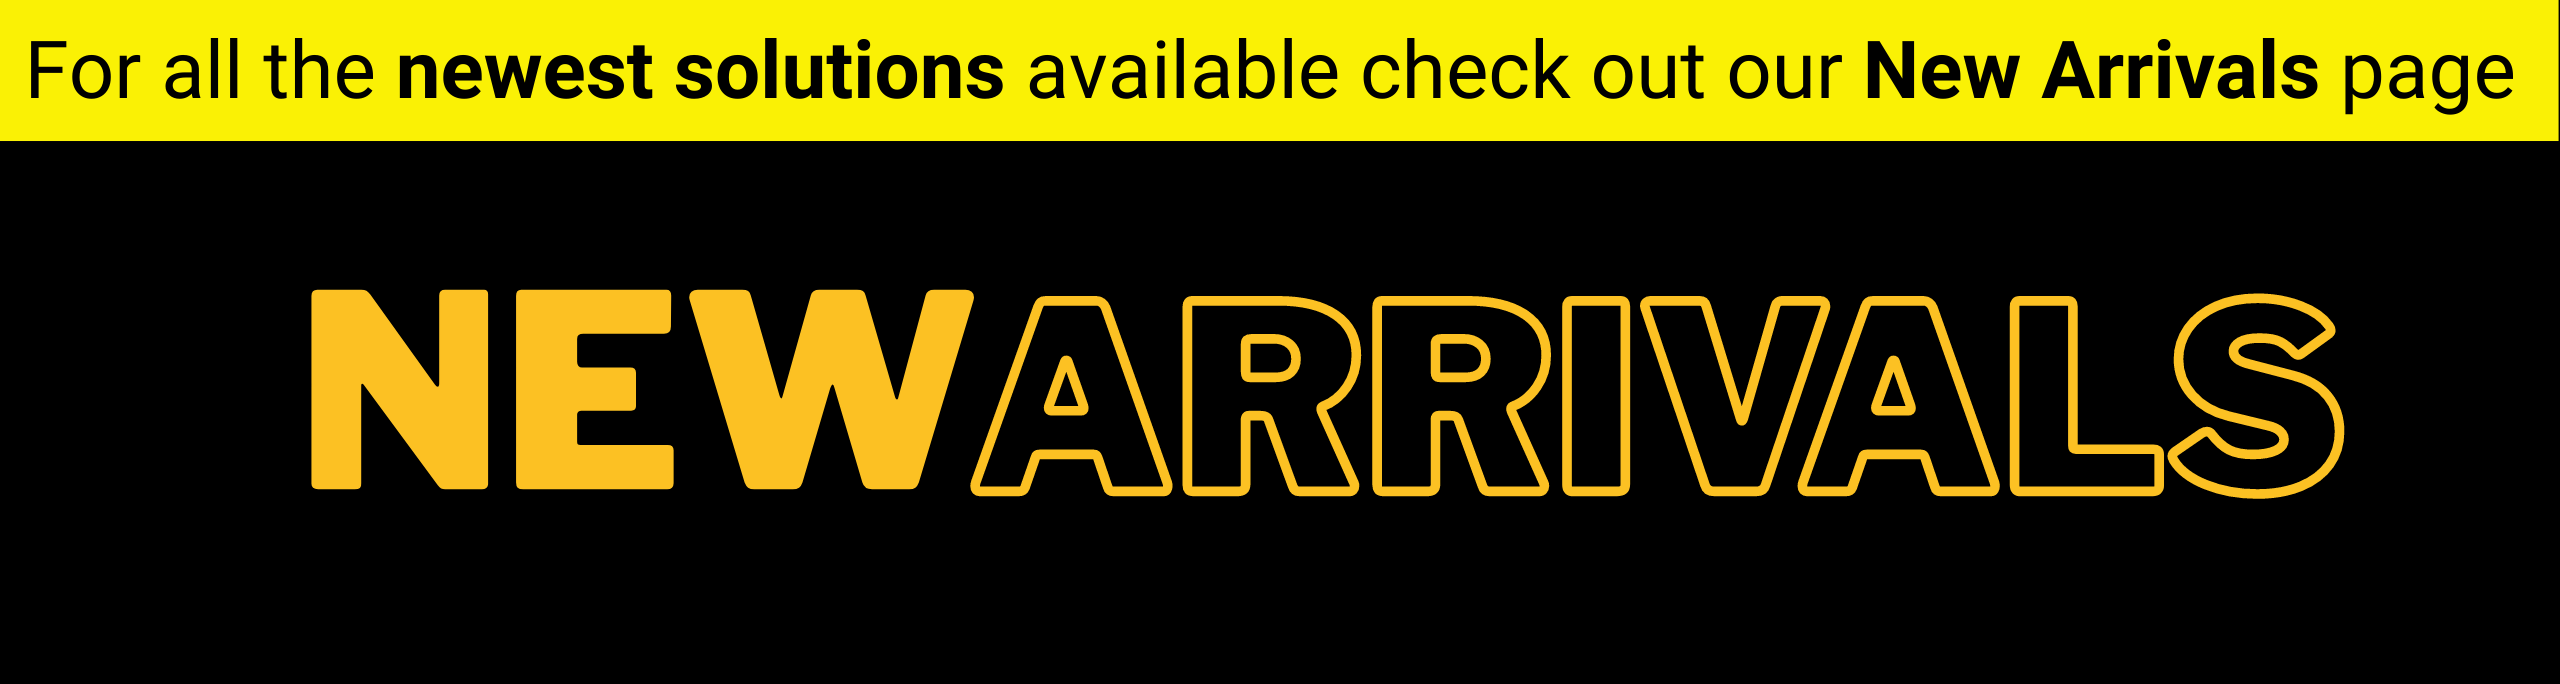 For all the newest solutions available check out our  New Arrivals page